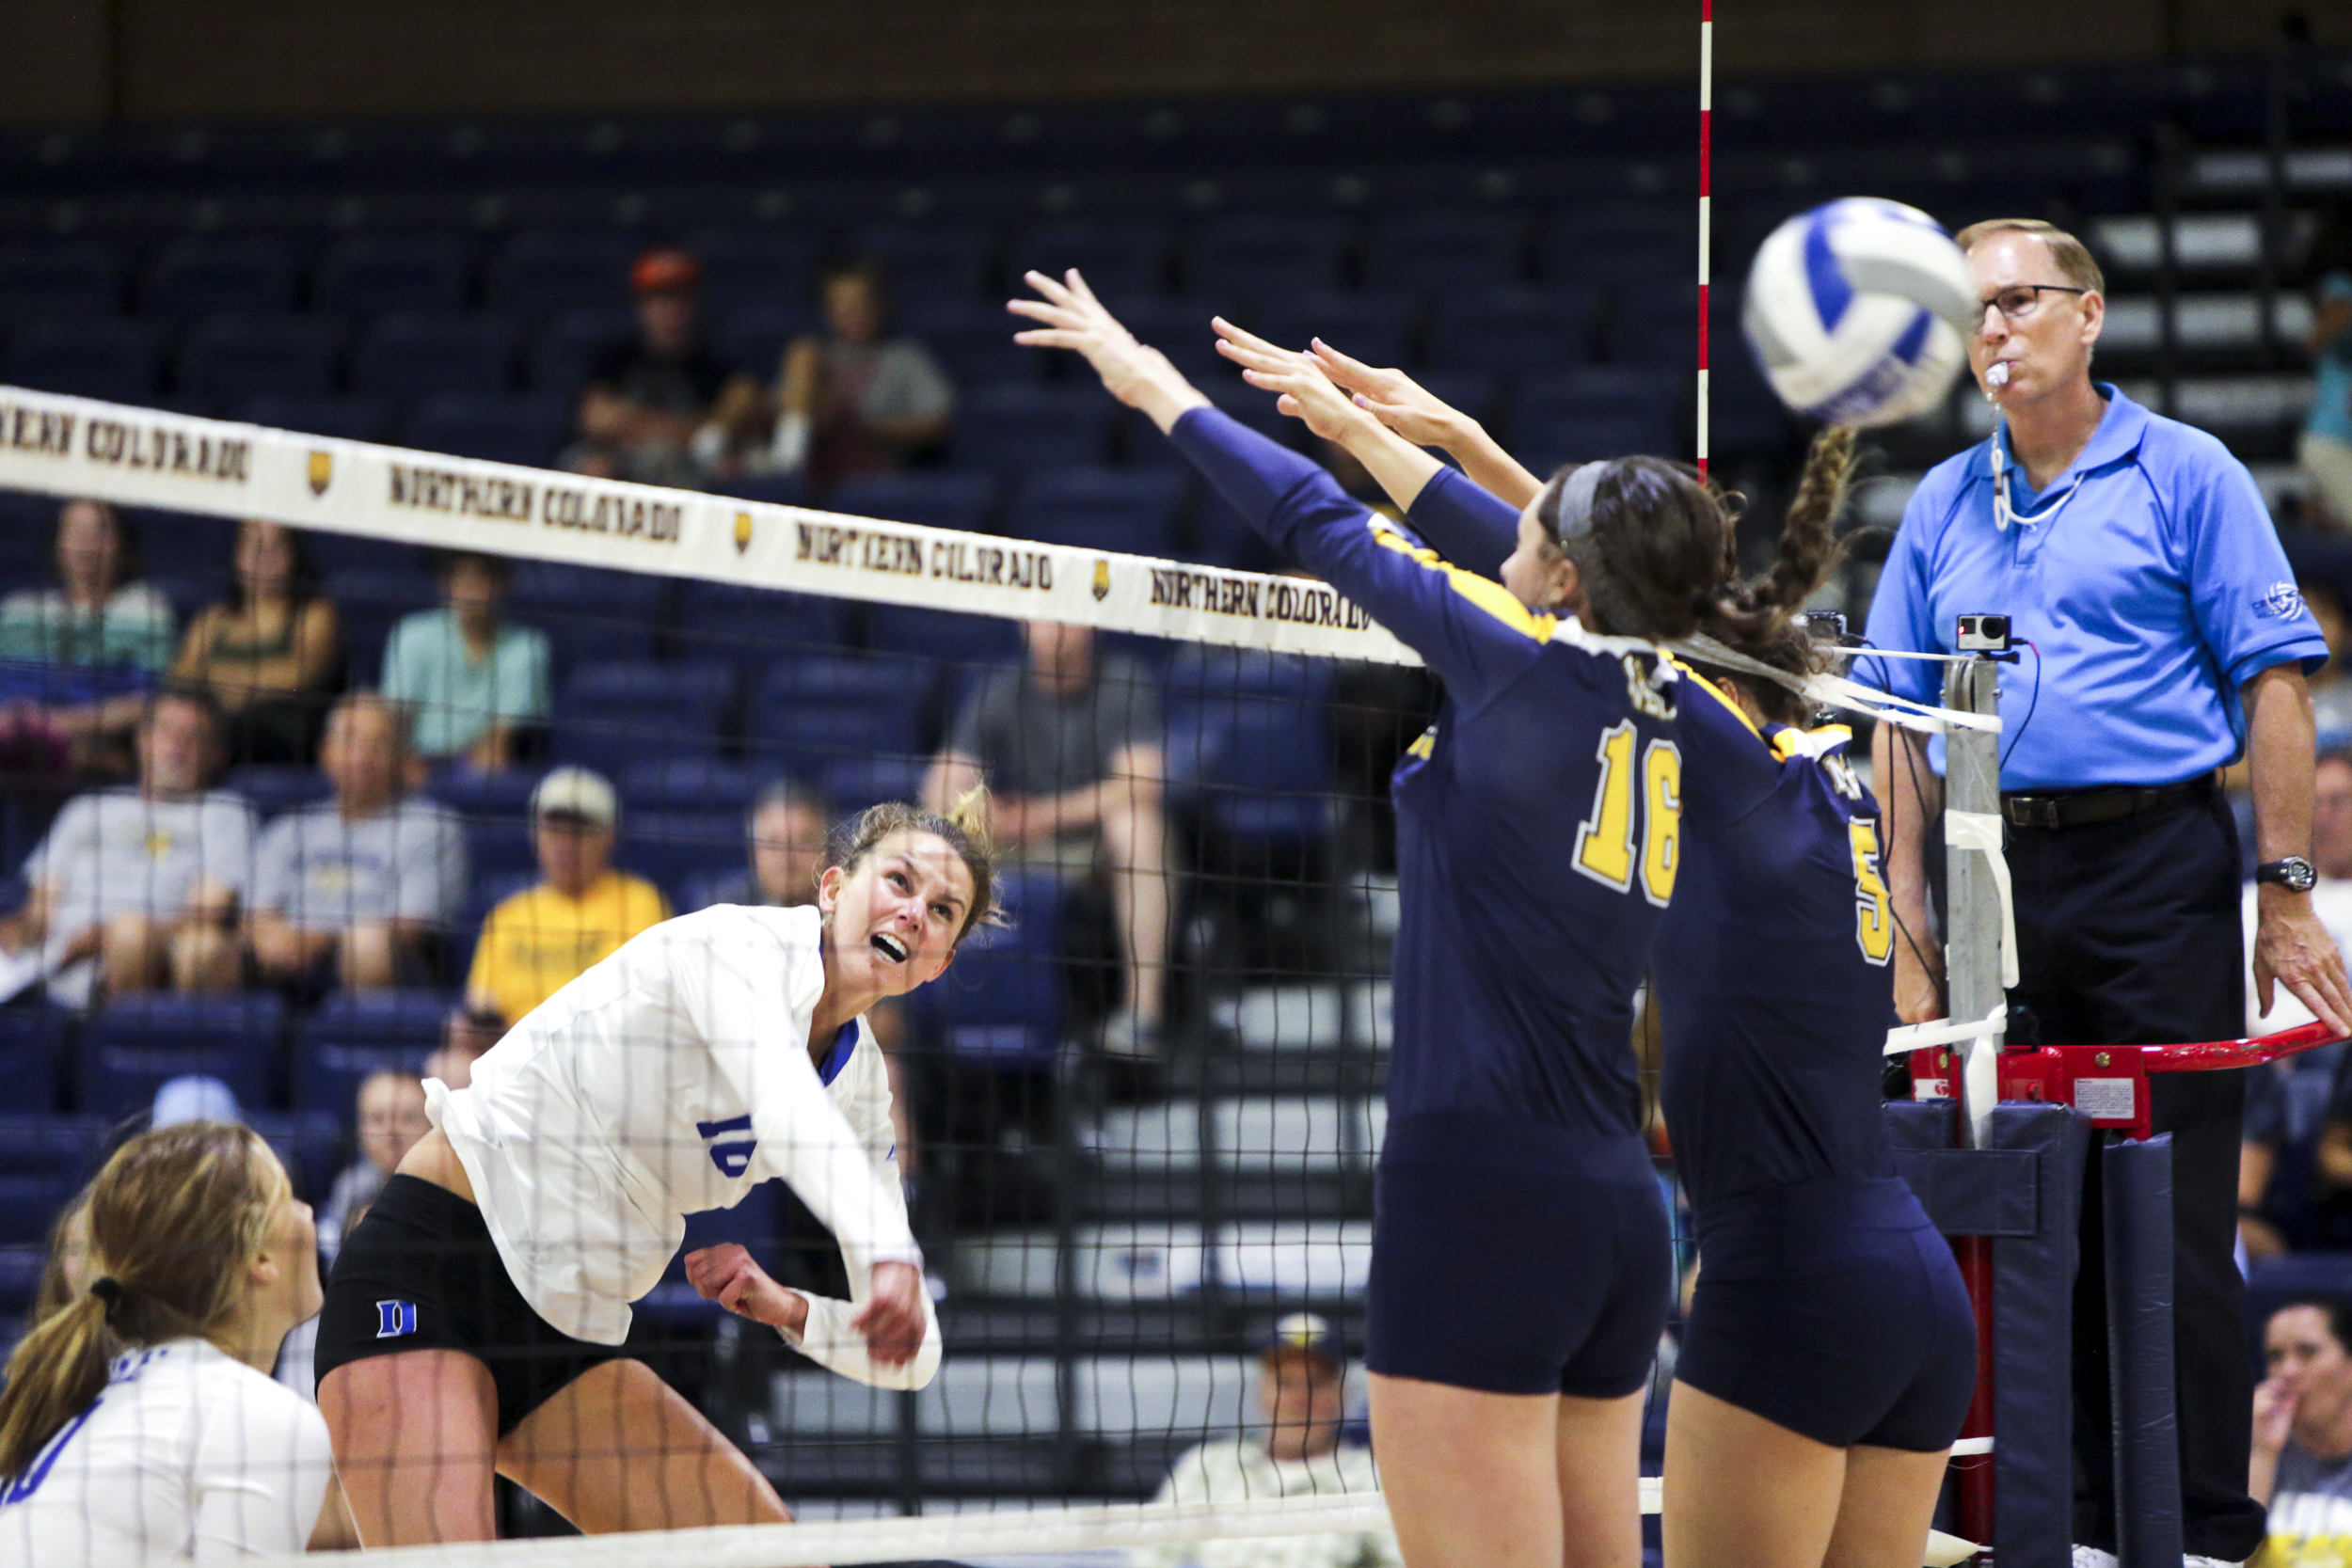  Duke University's Cadie Bates spikes the ball over University of Colorado's block during a volleyball game on Saturday at the Bank of Colorado Arena in Greeley, Colorado. 